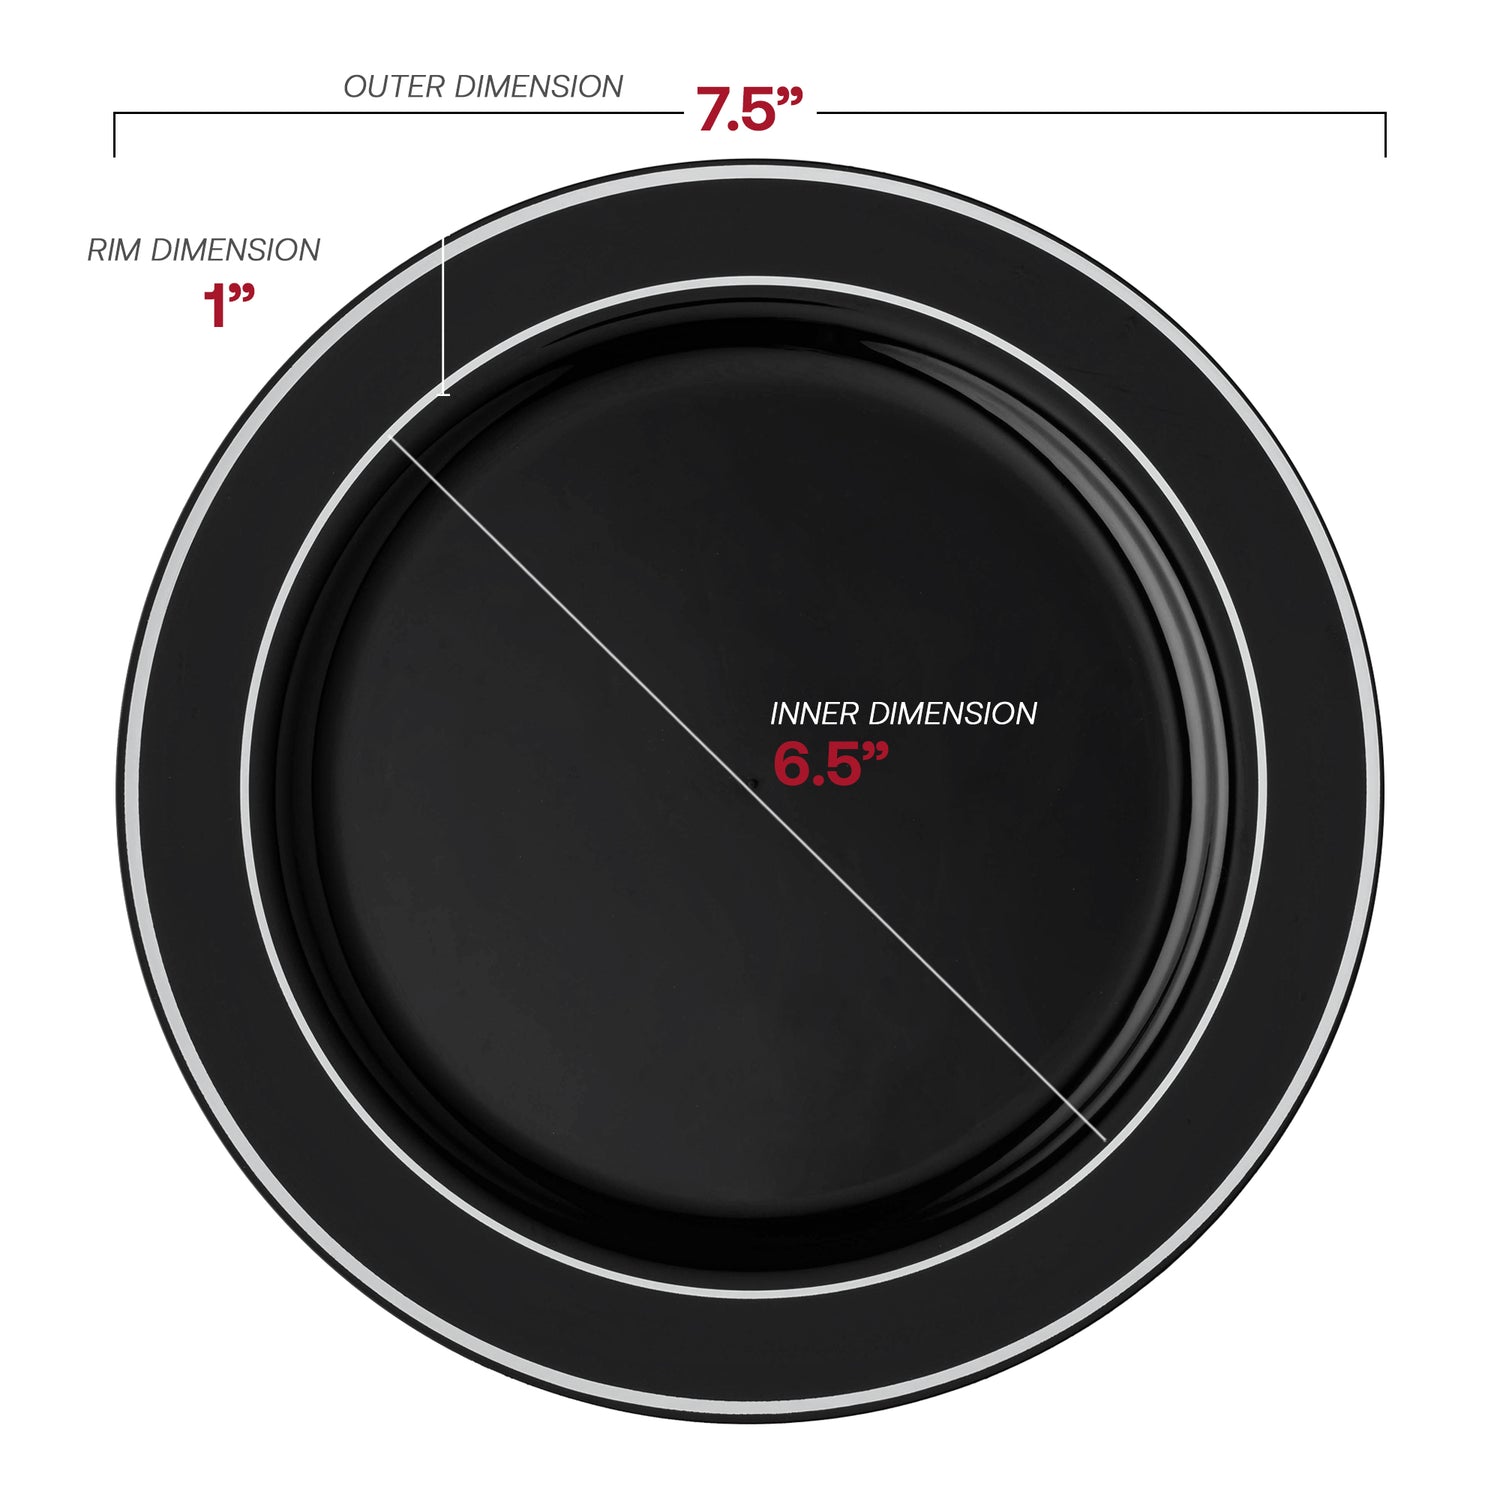 Black with Silver Edge Rim Plastic Appetizer/Salad Plates (7.5") Dimension | The Kaya Collection